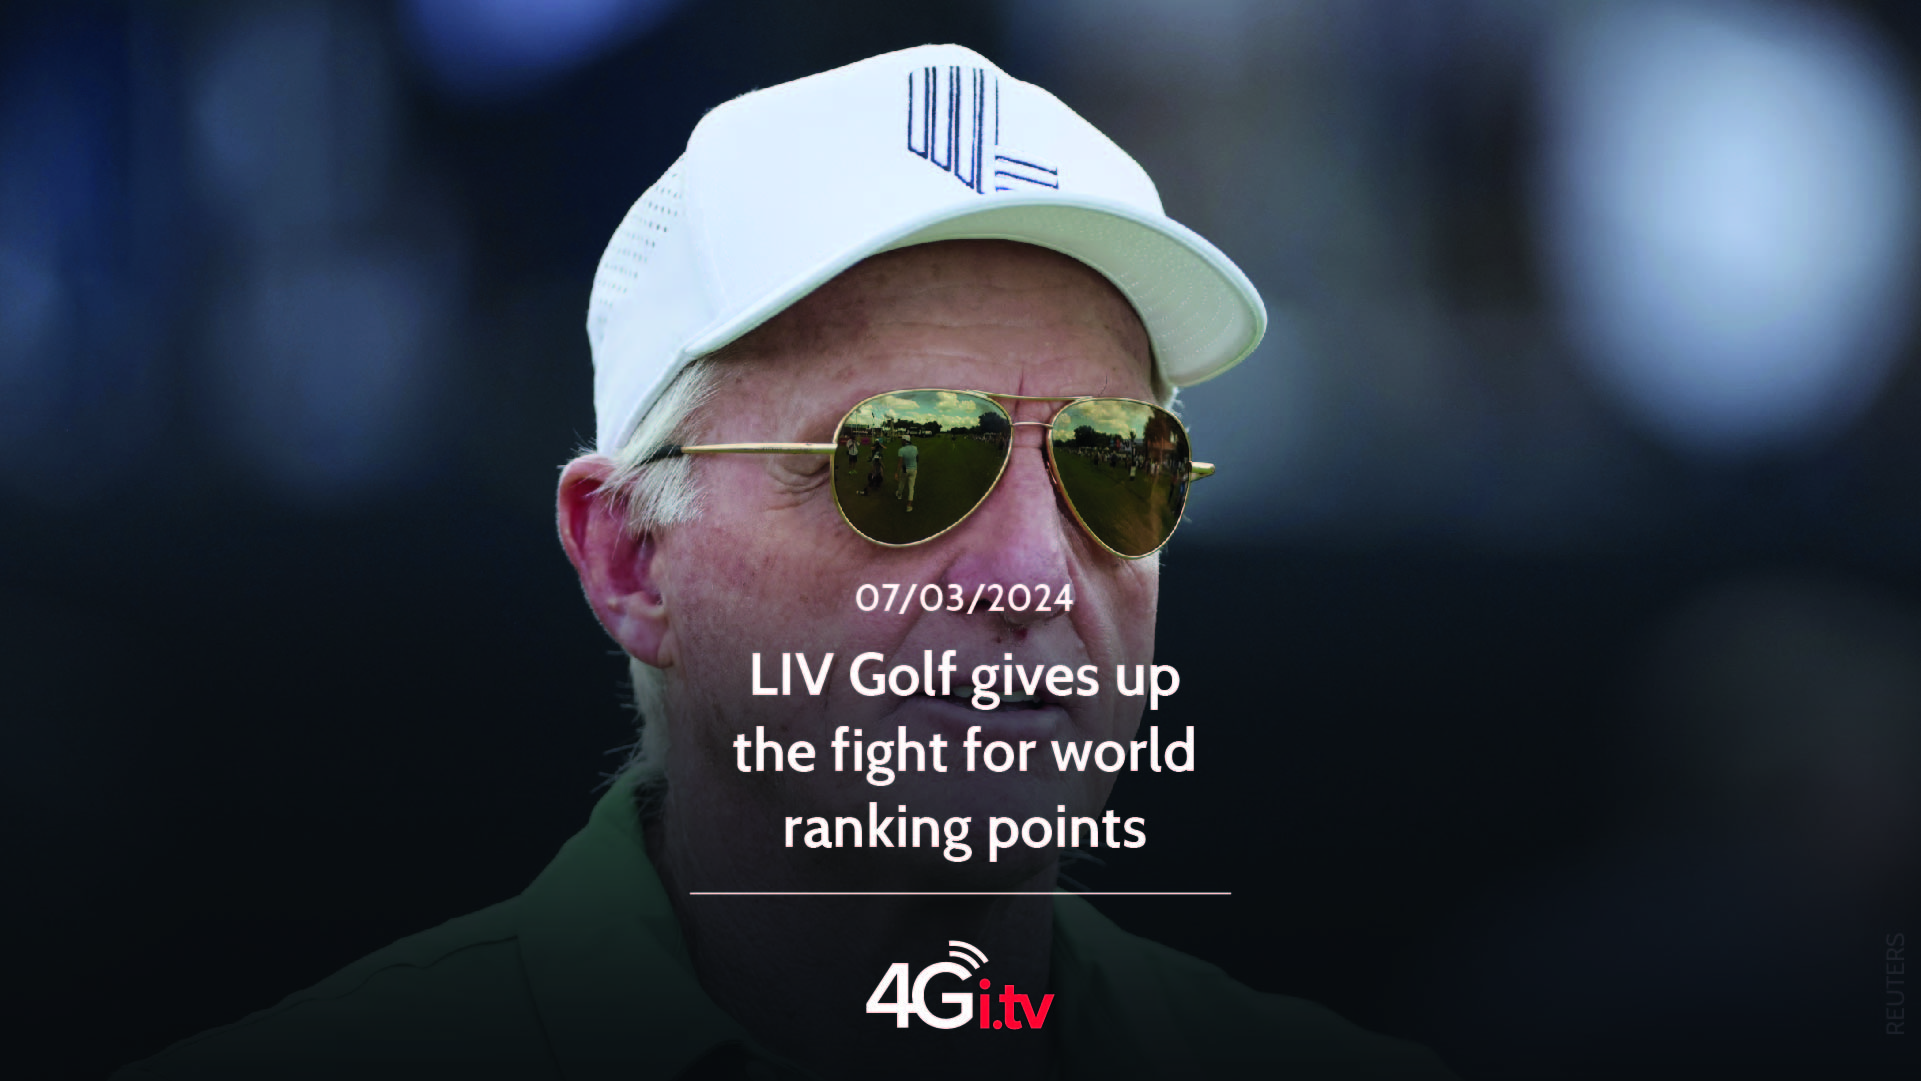 Подробнее о статье LIV Golf gives up the fight for world ranking points